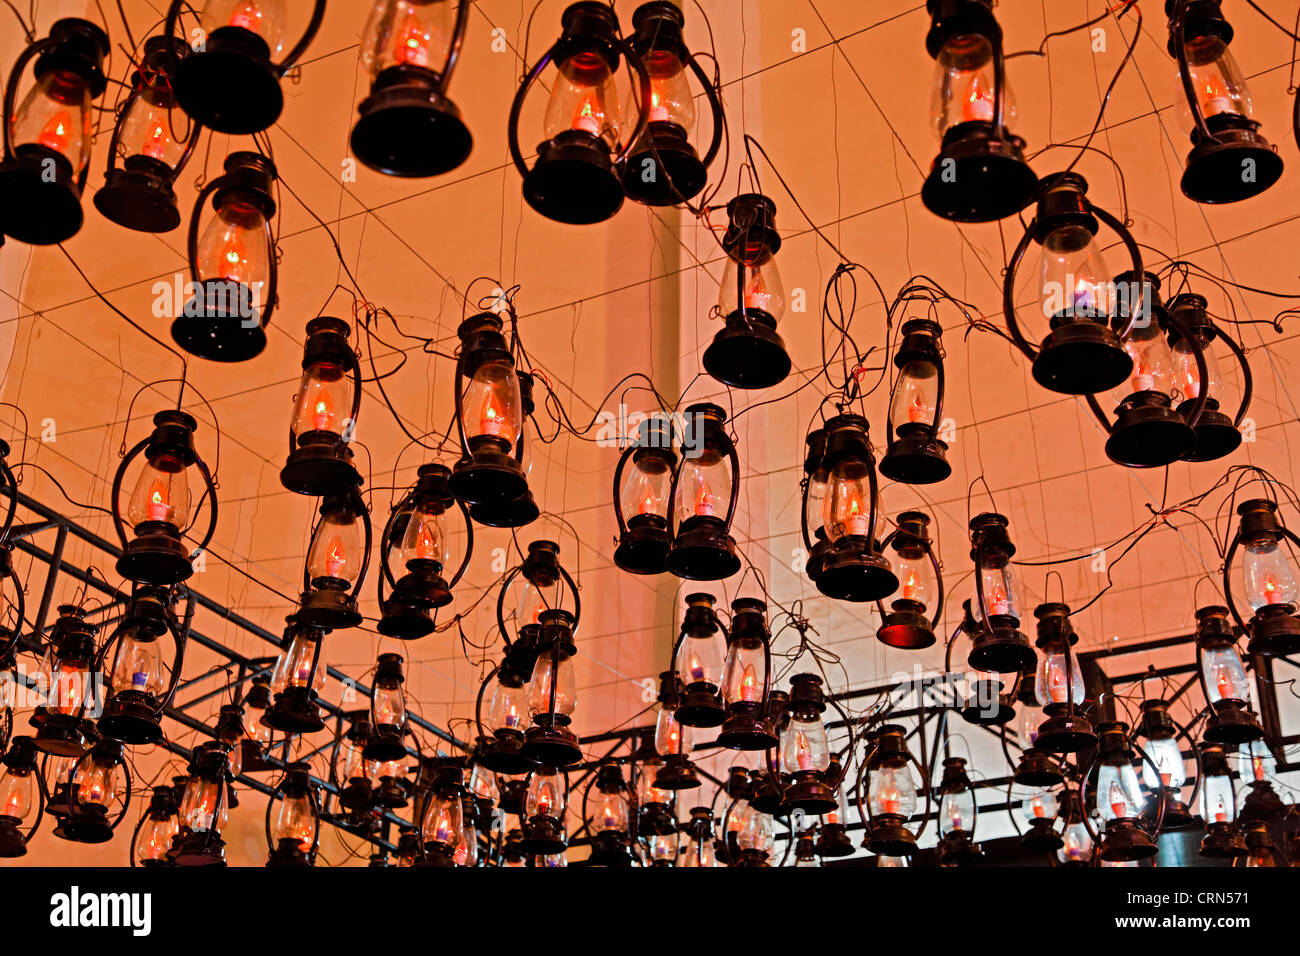 Texture of conceptual lighting arrangement of tungsten lanterns hanging from the ceiling Stock Photo